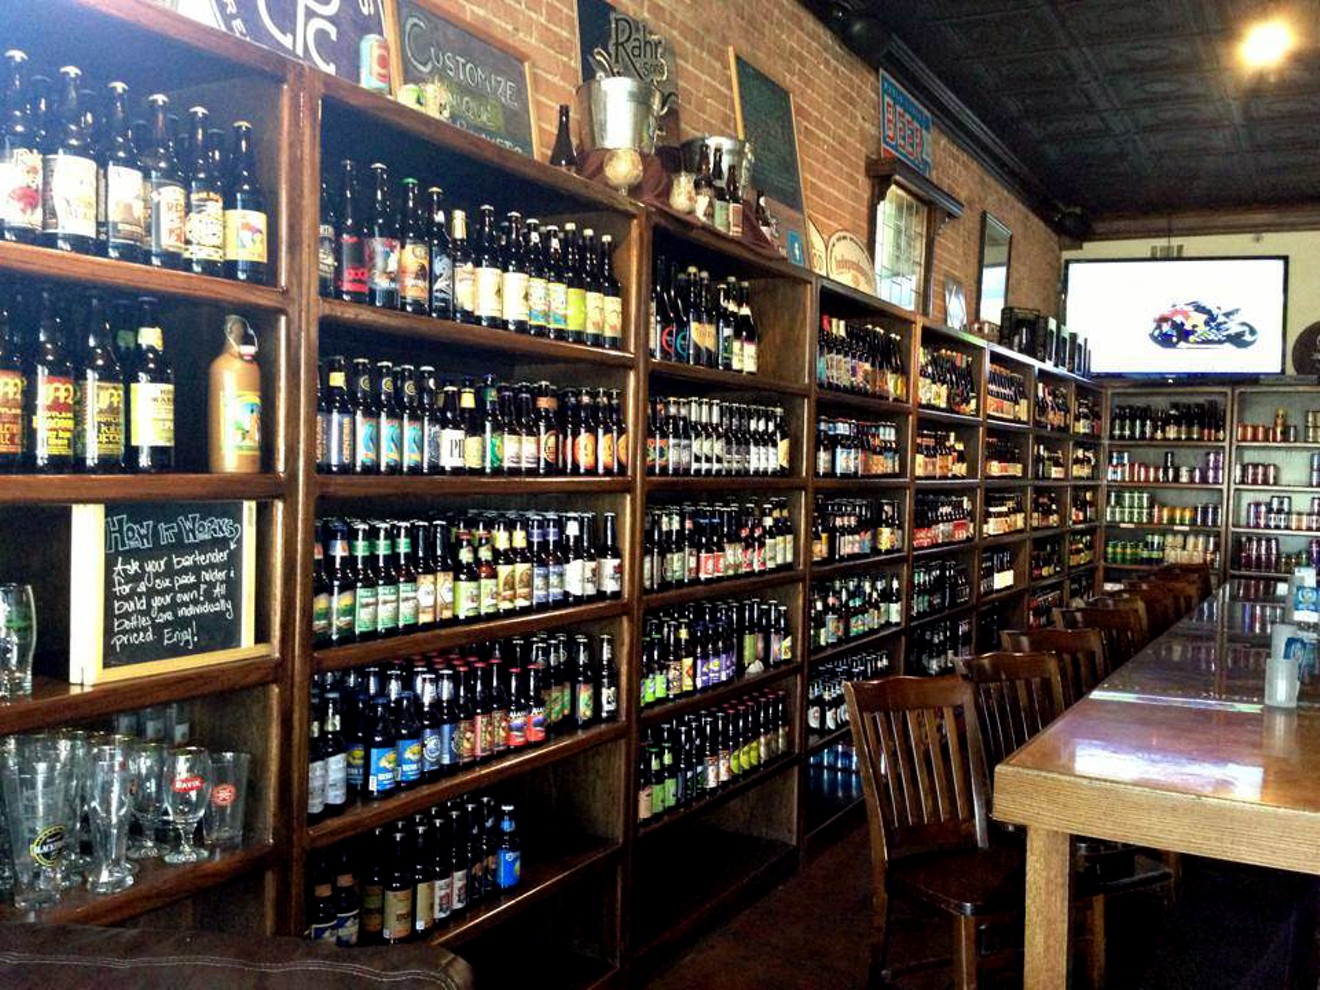 The Bottle Shop on Greenville Avenue is closing at the end of the month, but not before owners dig deep into their rare beer collection to share the goods with Dallas drinkers.